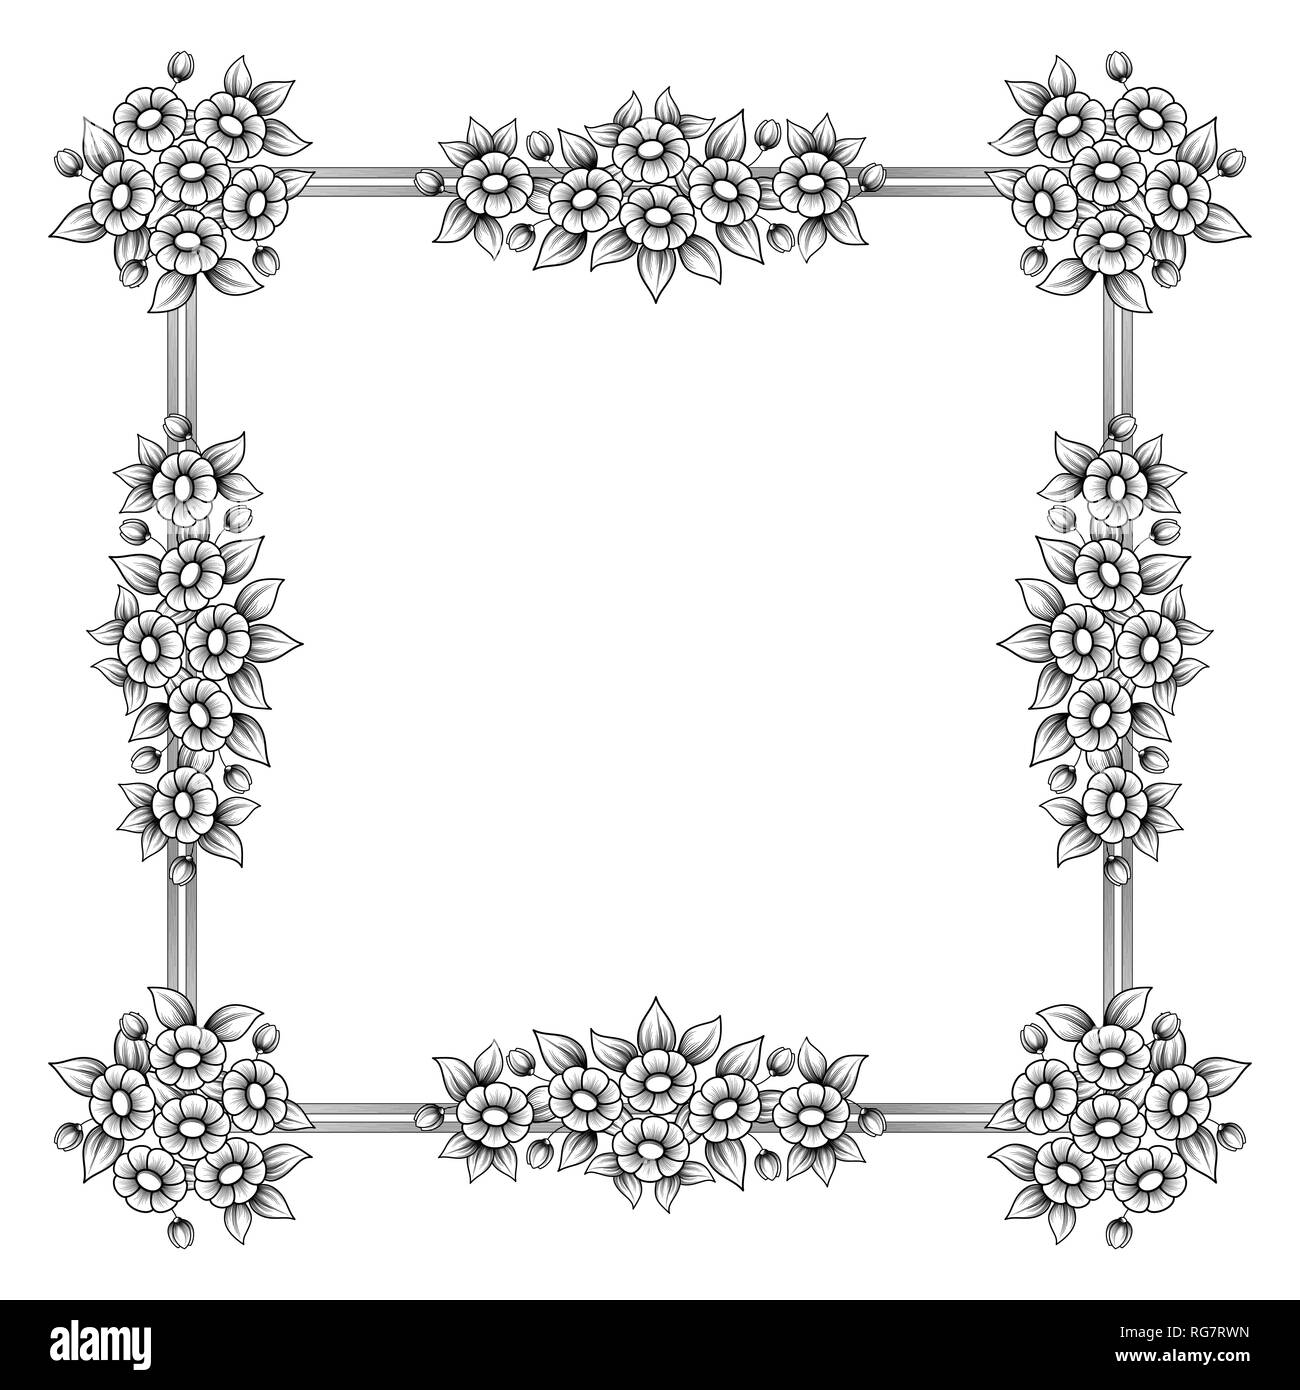 Black outline daisy flowers square frame isolated on white background Stock Vector